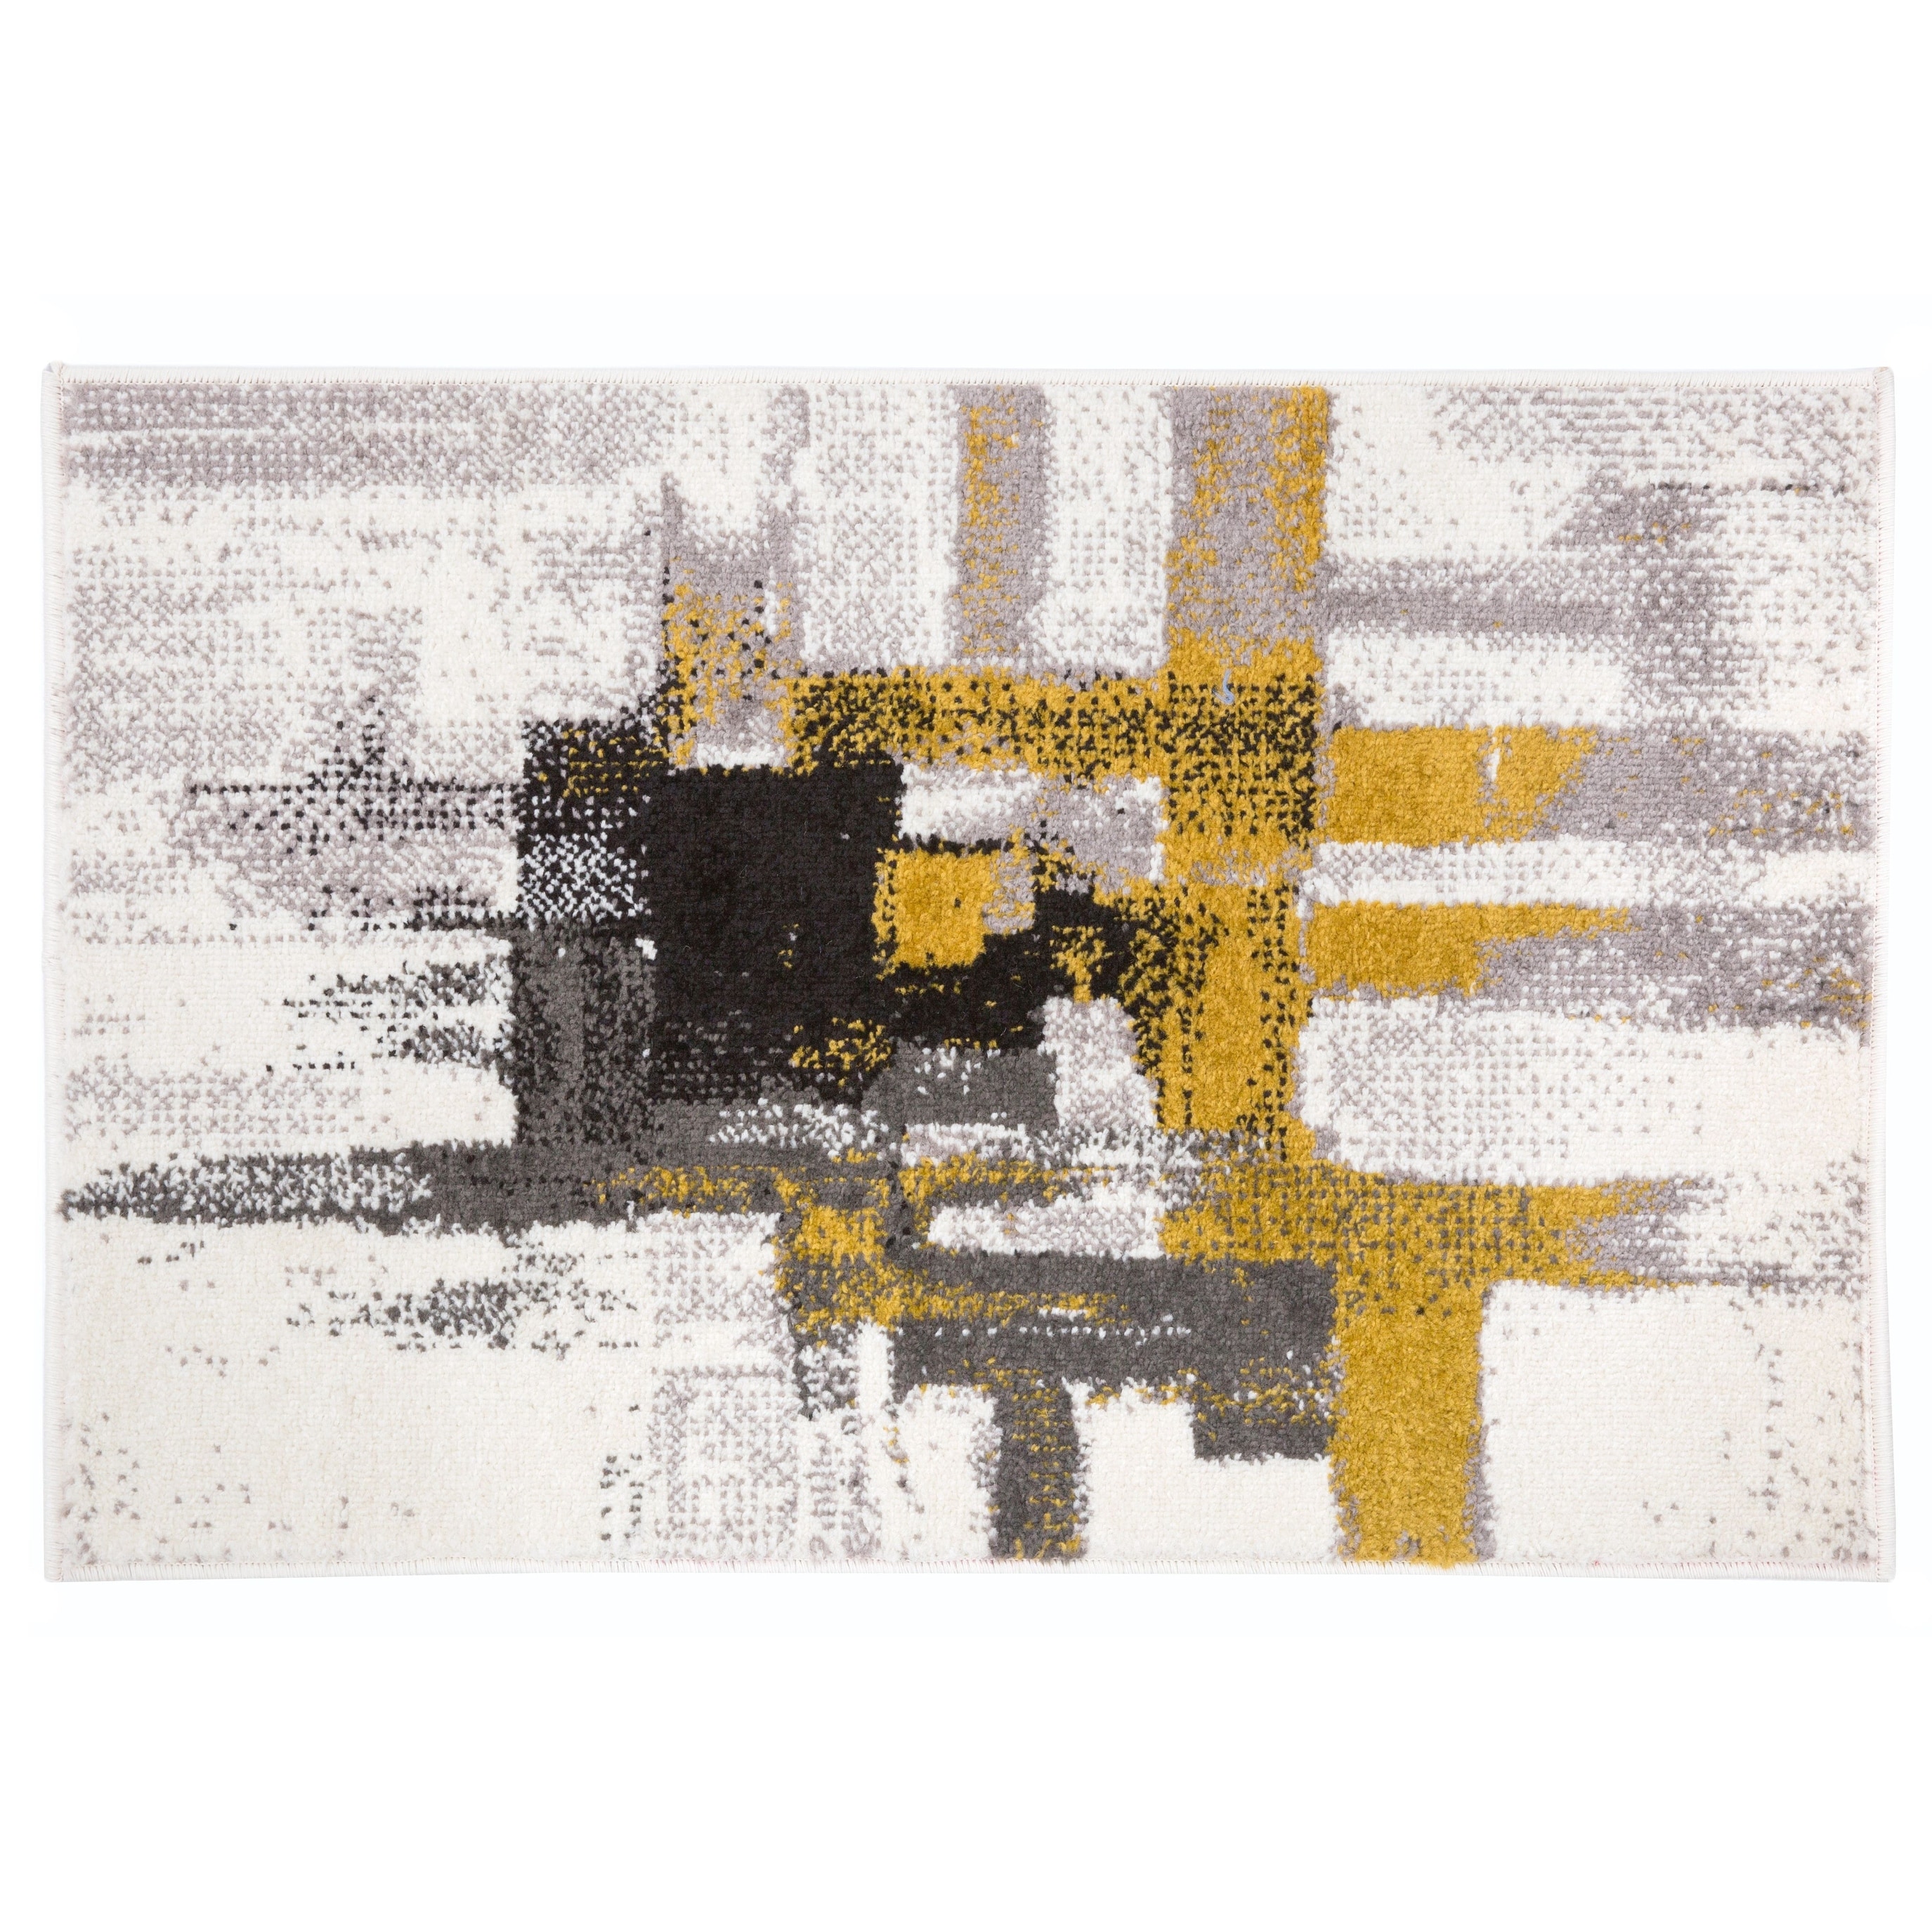 Rugshop Contemporary Modern Abstract Area Rug 5' x 7' Gold